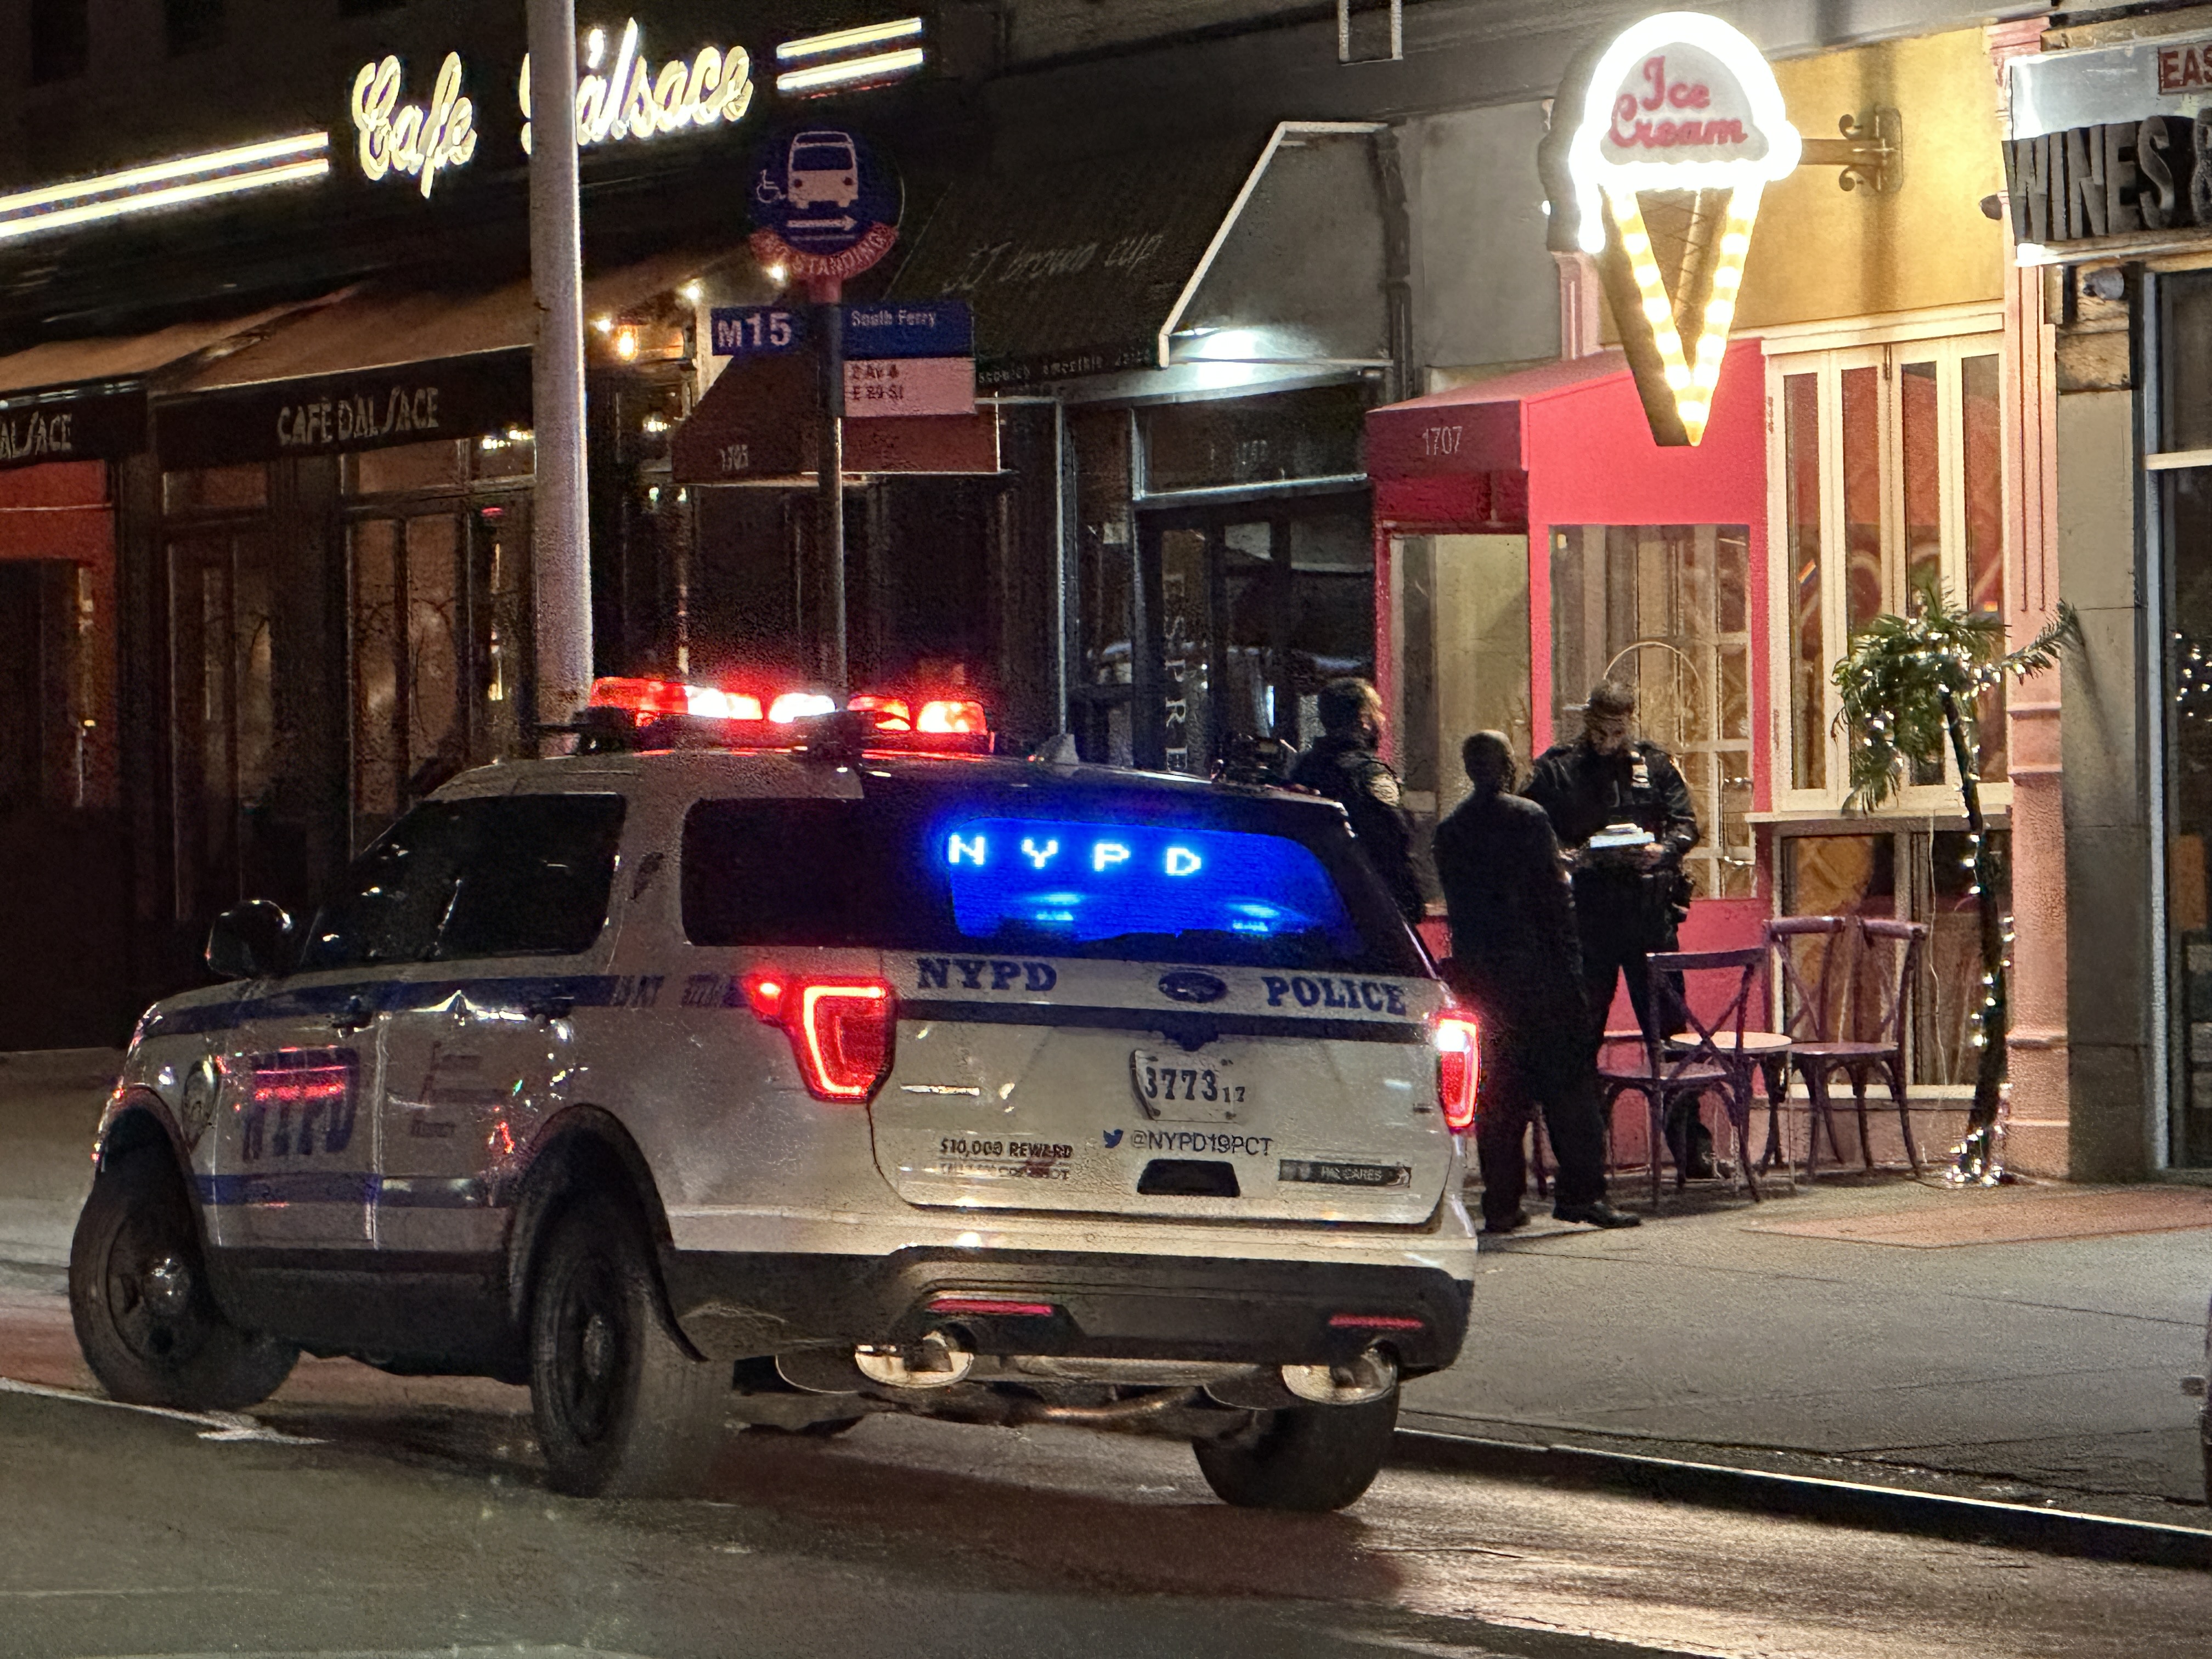 Police canvassed the area around The UES ice cream shop Saturday night, looking for the suspect | Upper East Site